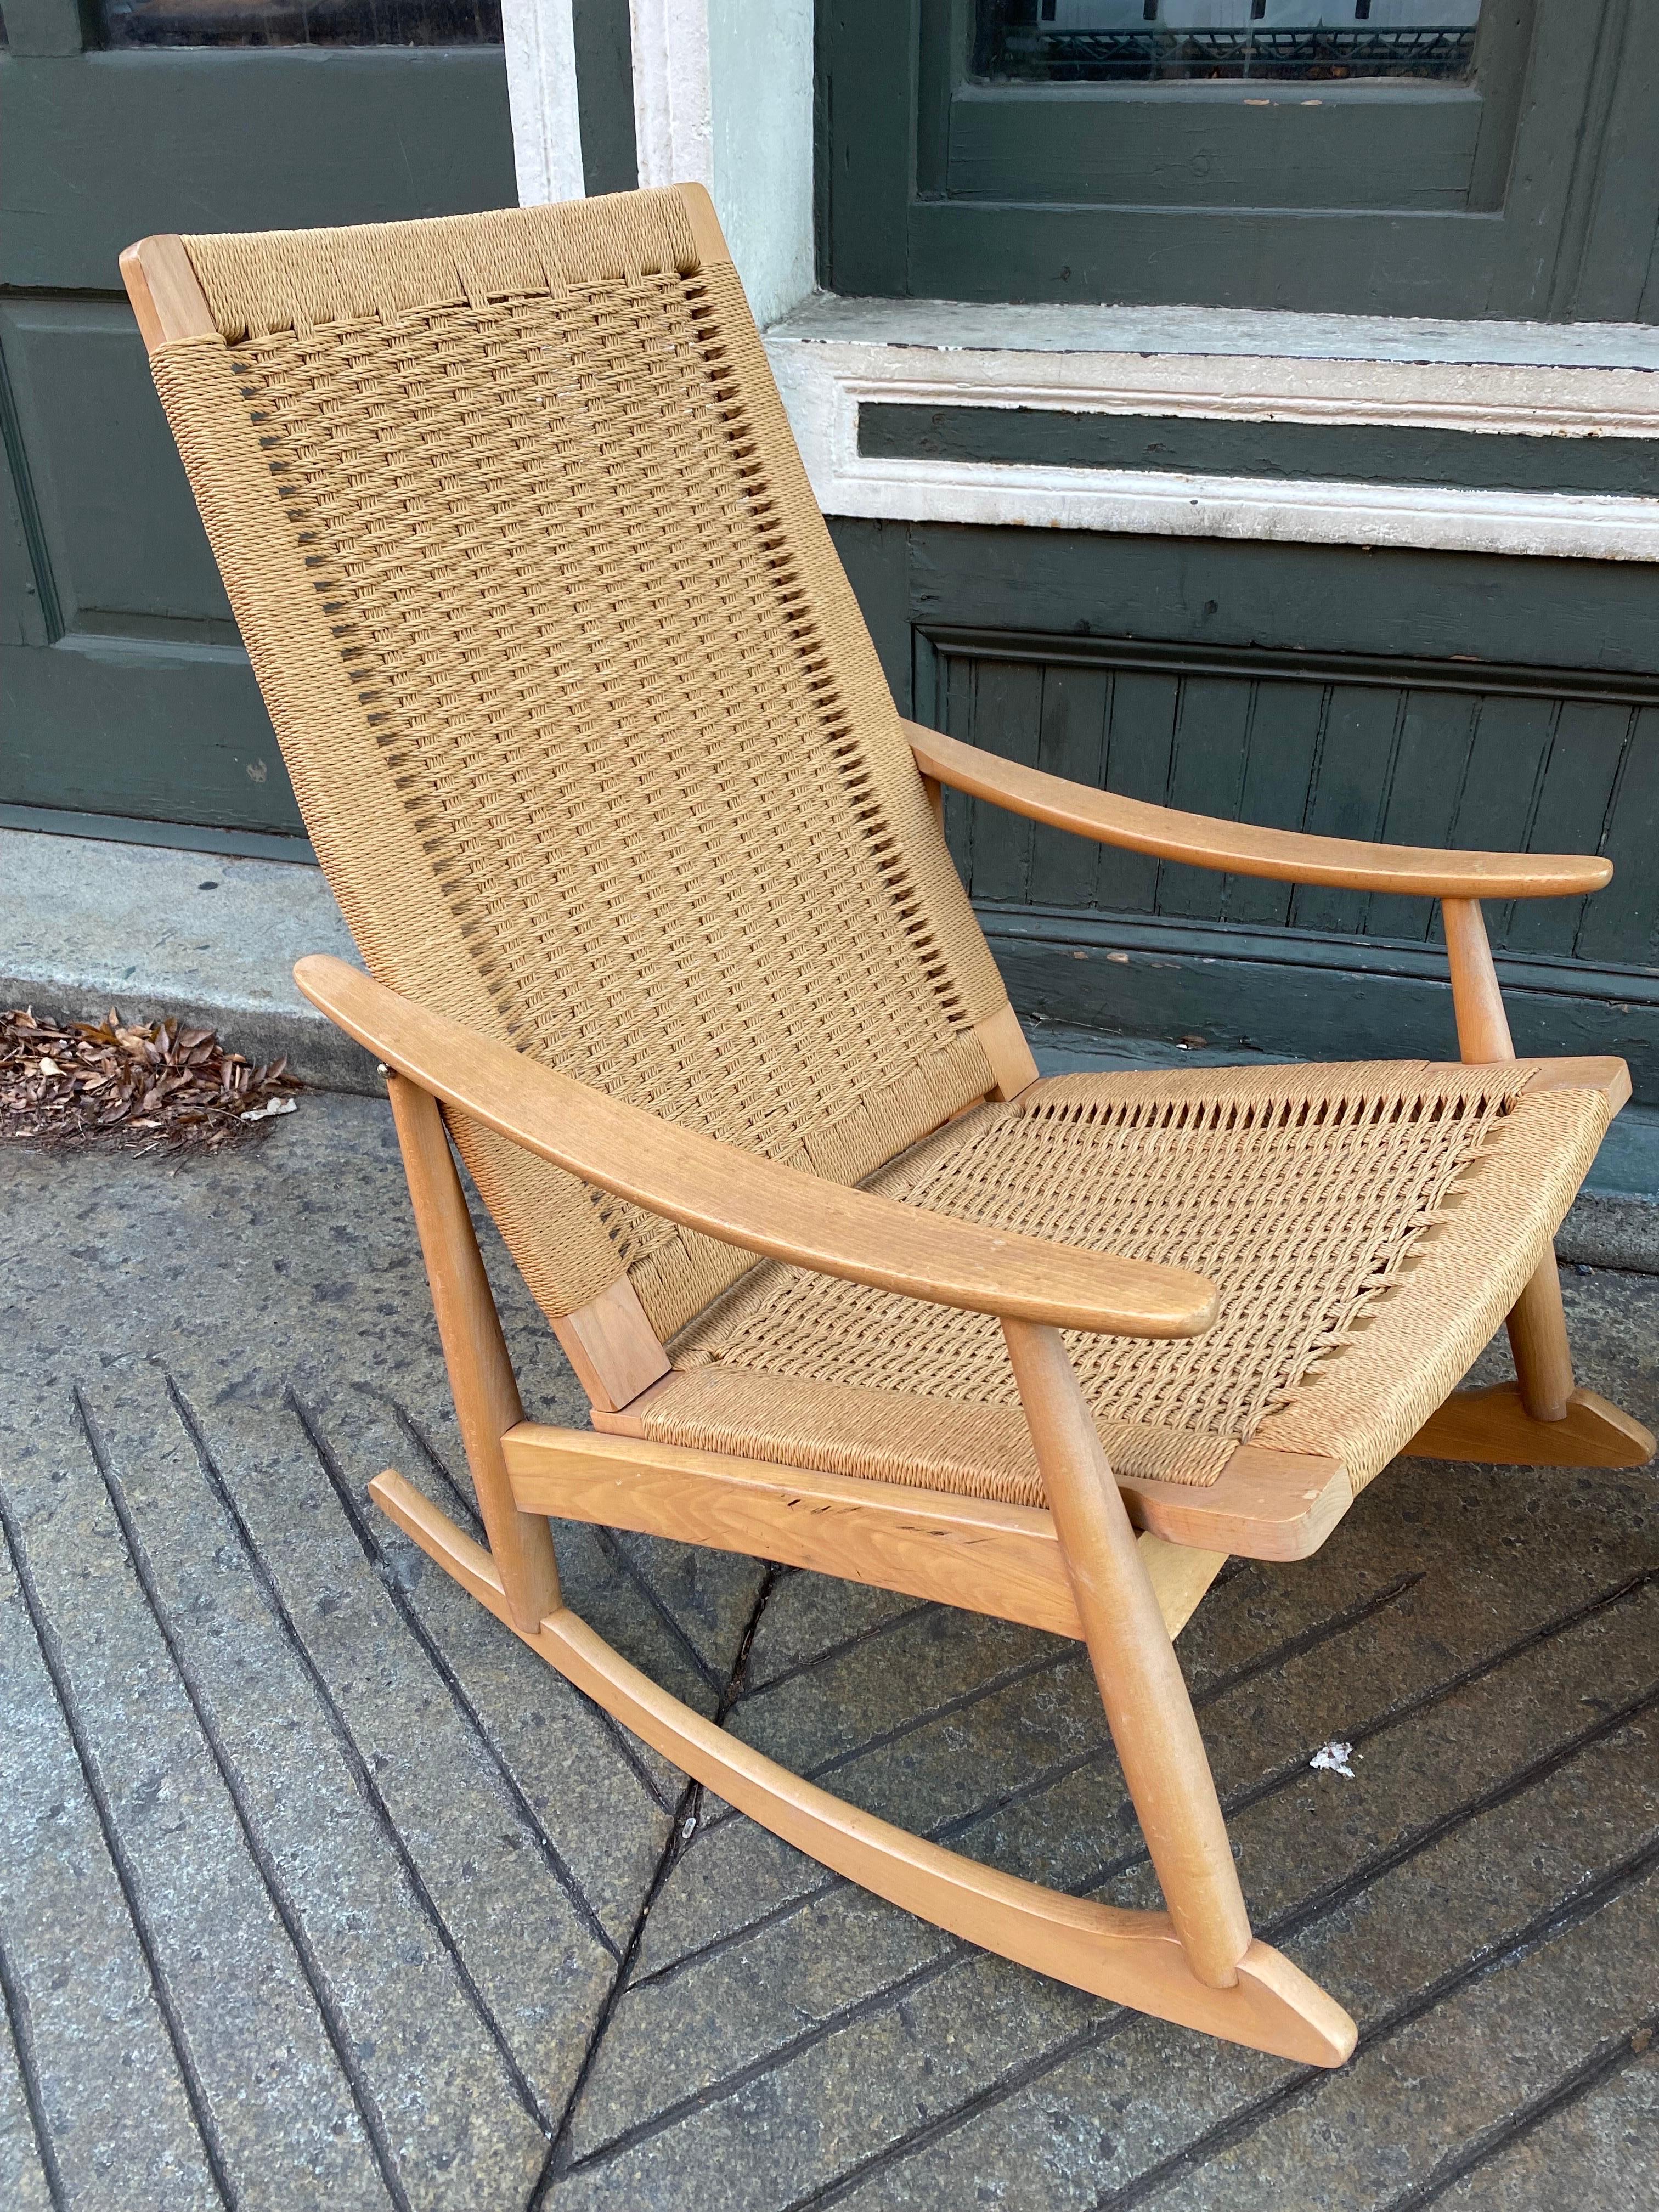 Beautiful, modern oak rocker with roped seat and back. Sold with its matching ottoman. The rope seat and back is woven in a beautiful modern and soft texture. Manufactured in Japan (marking on bottom of frame). Very soft and comfortable as a rocking